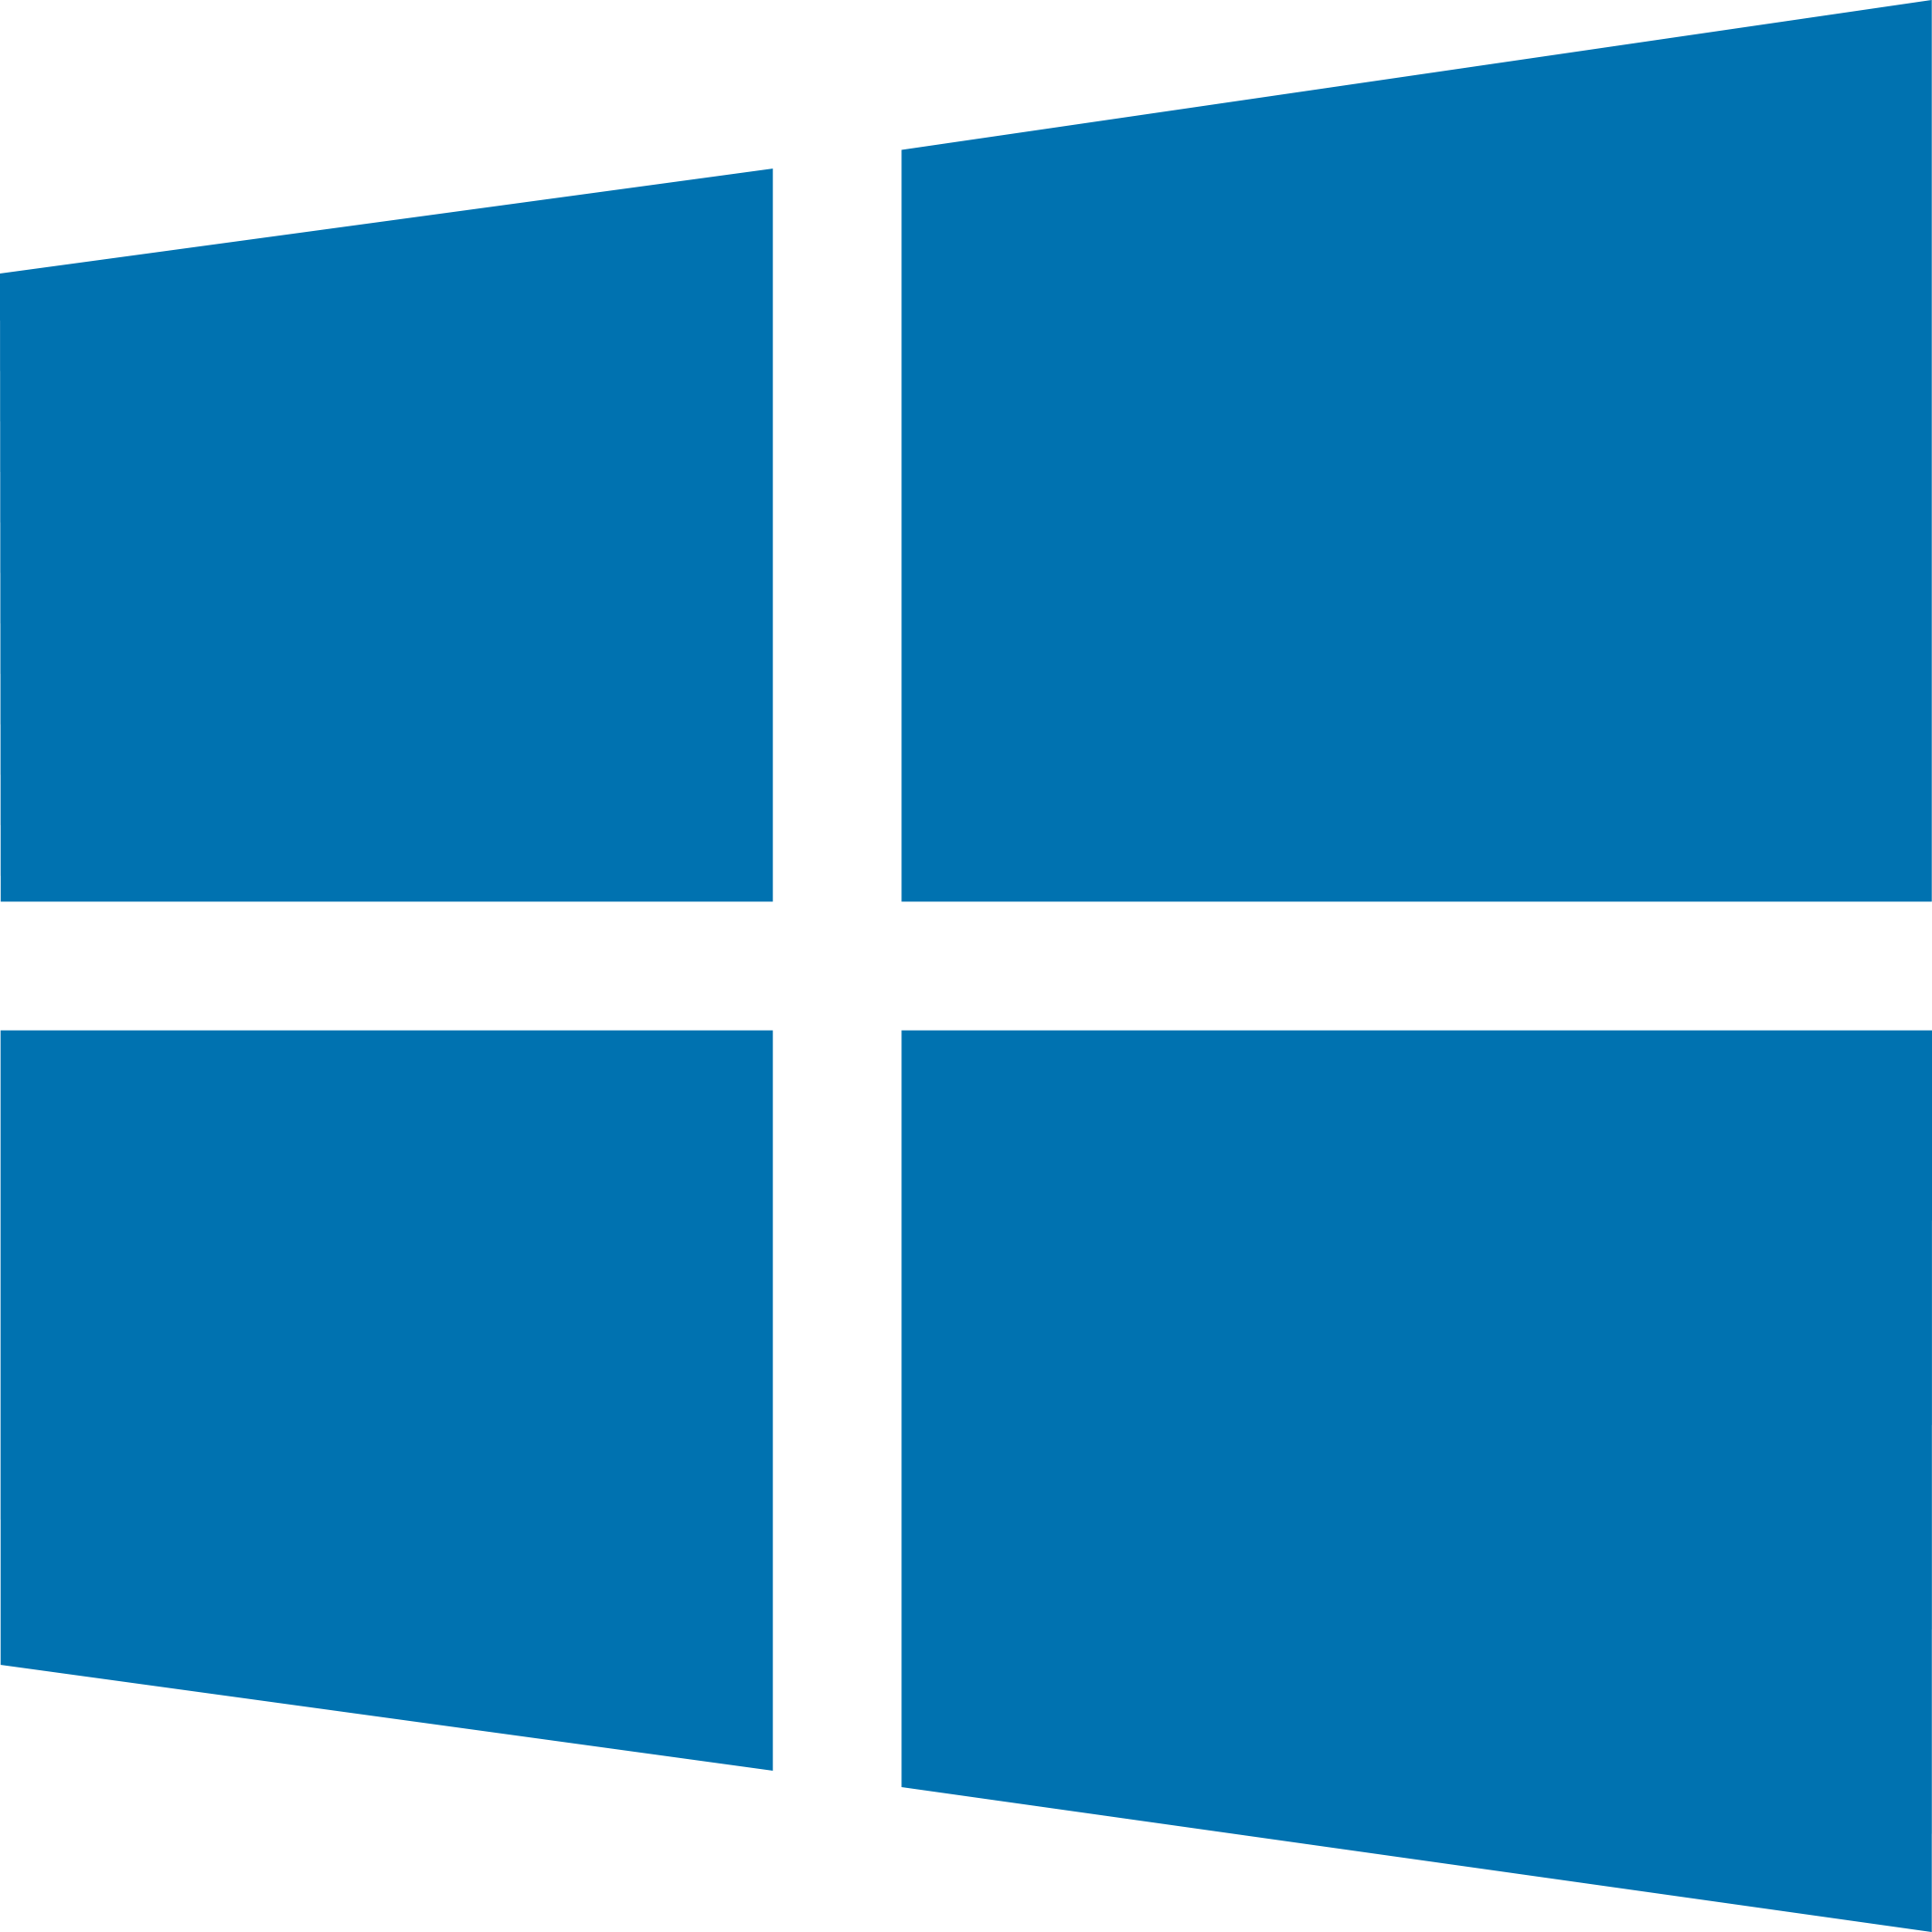 Microsoft Certified Professionals